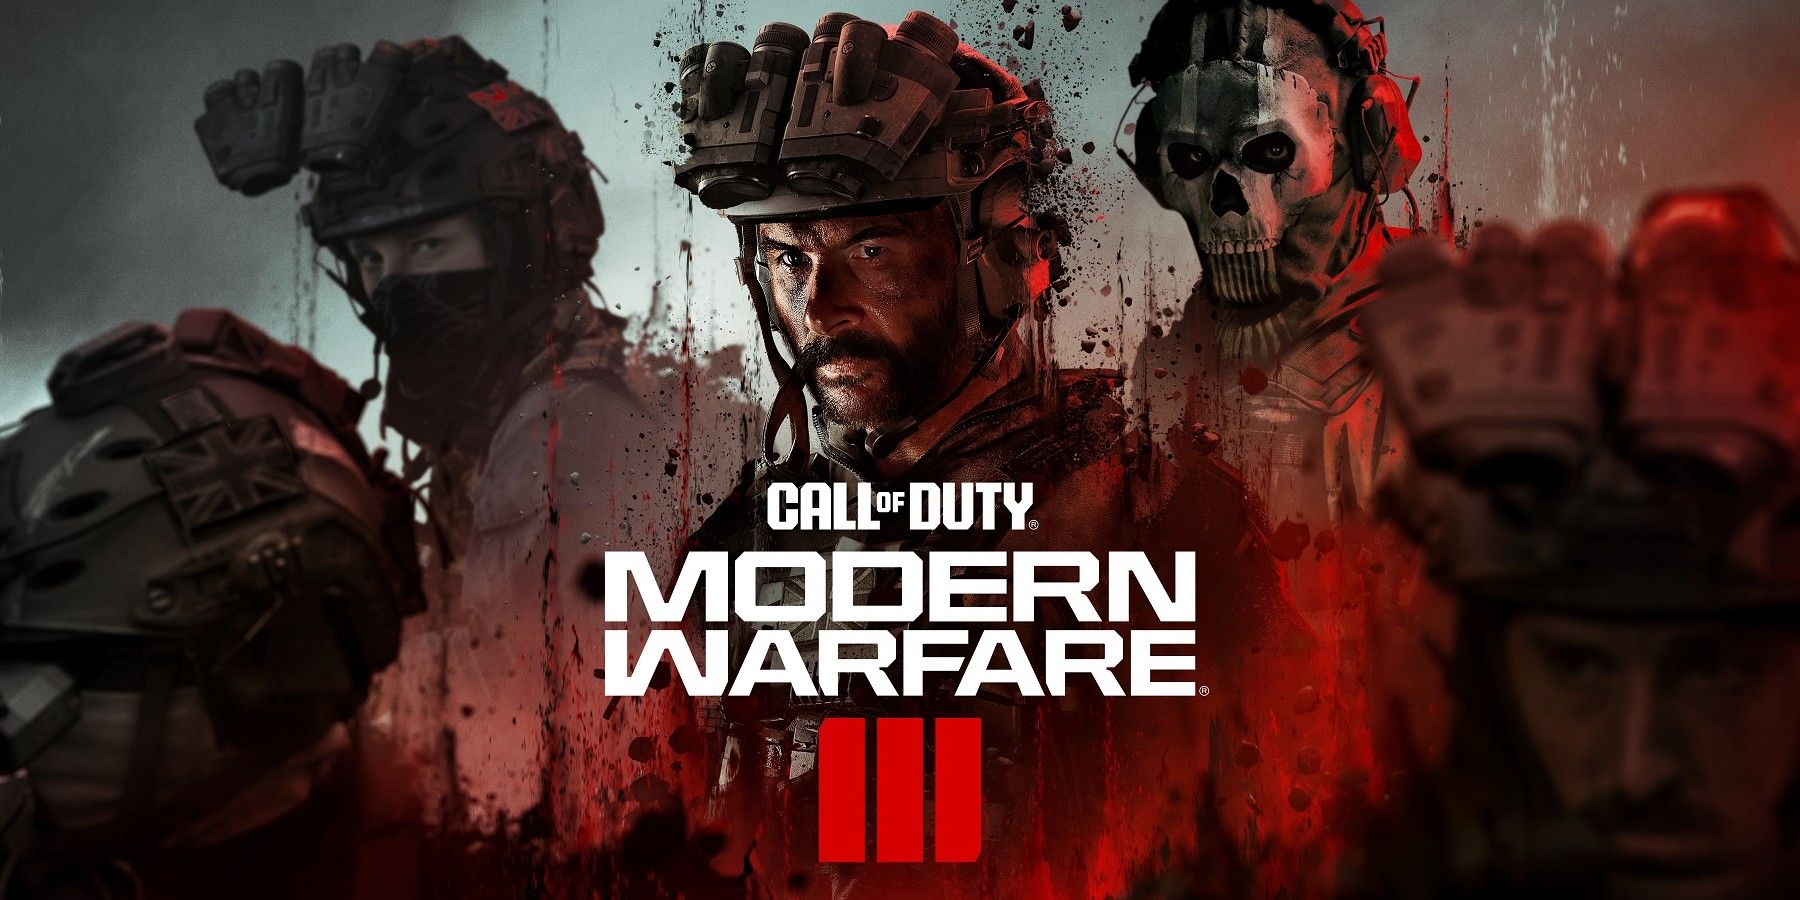 Call of Duty: Modern Warfare 2 PC performance, system requirements